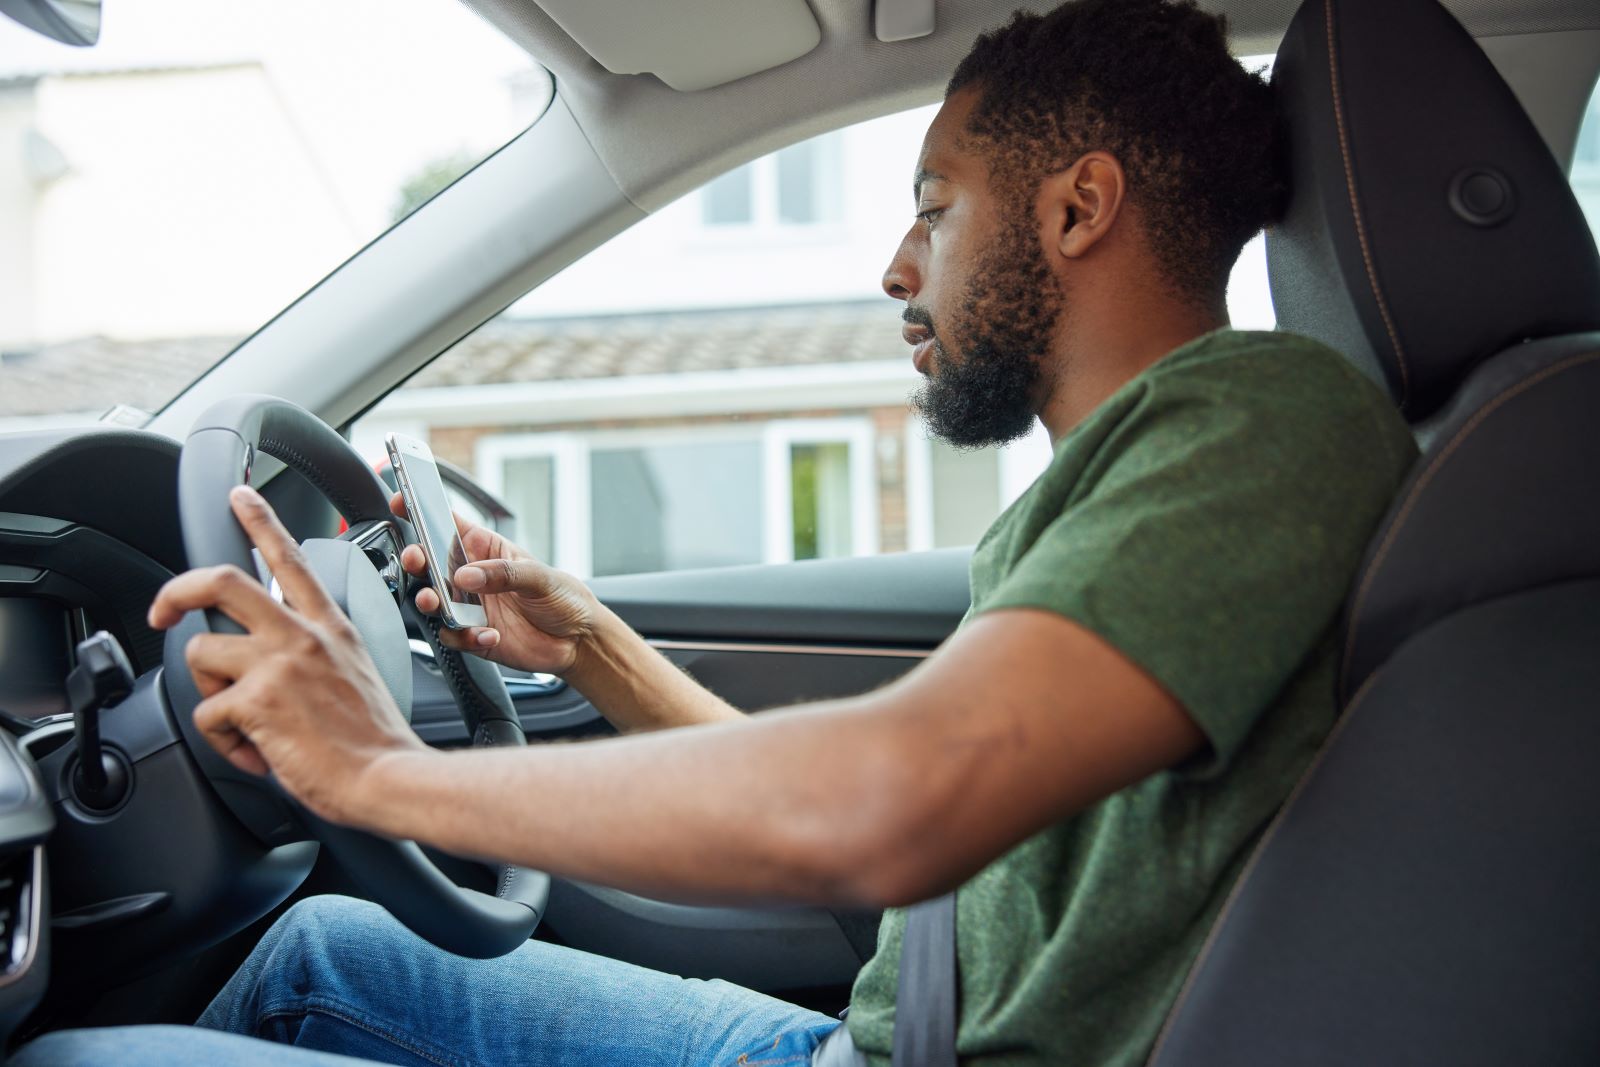 4 Ways to Stay Safe While 'Zooming' and Driving